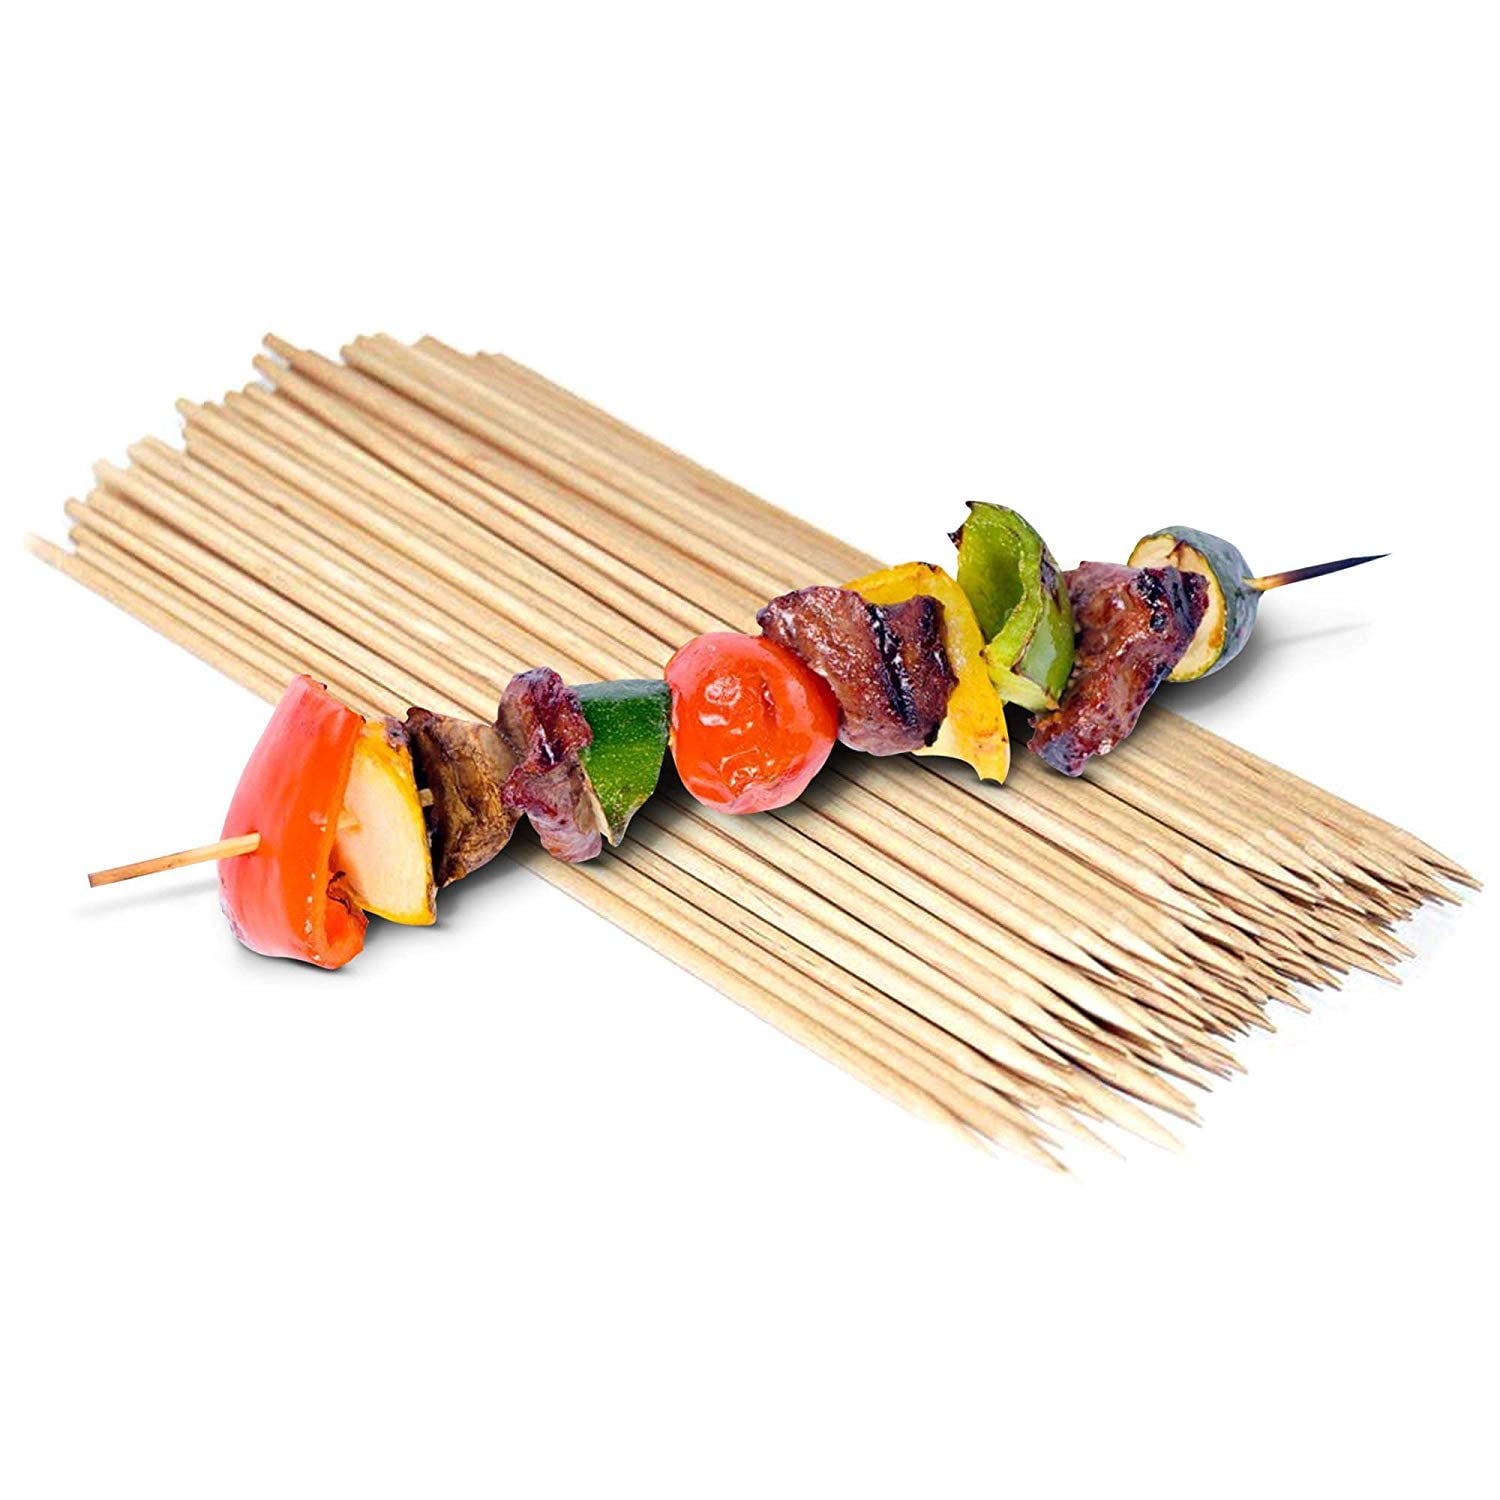 100 Pack Skewers,Bamboo Skewers for Grilling,BBQ,Fruit Kitchen,Party,Chocolate 